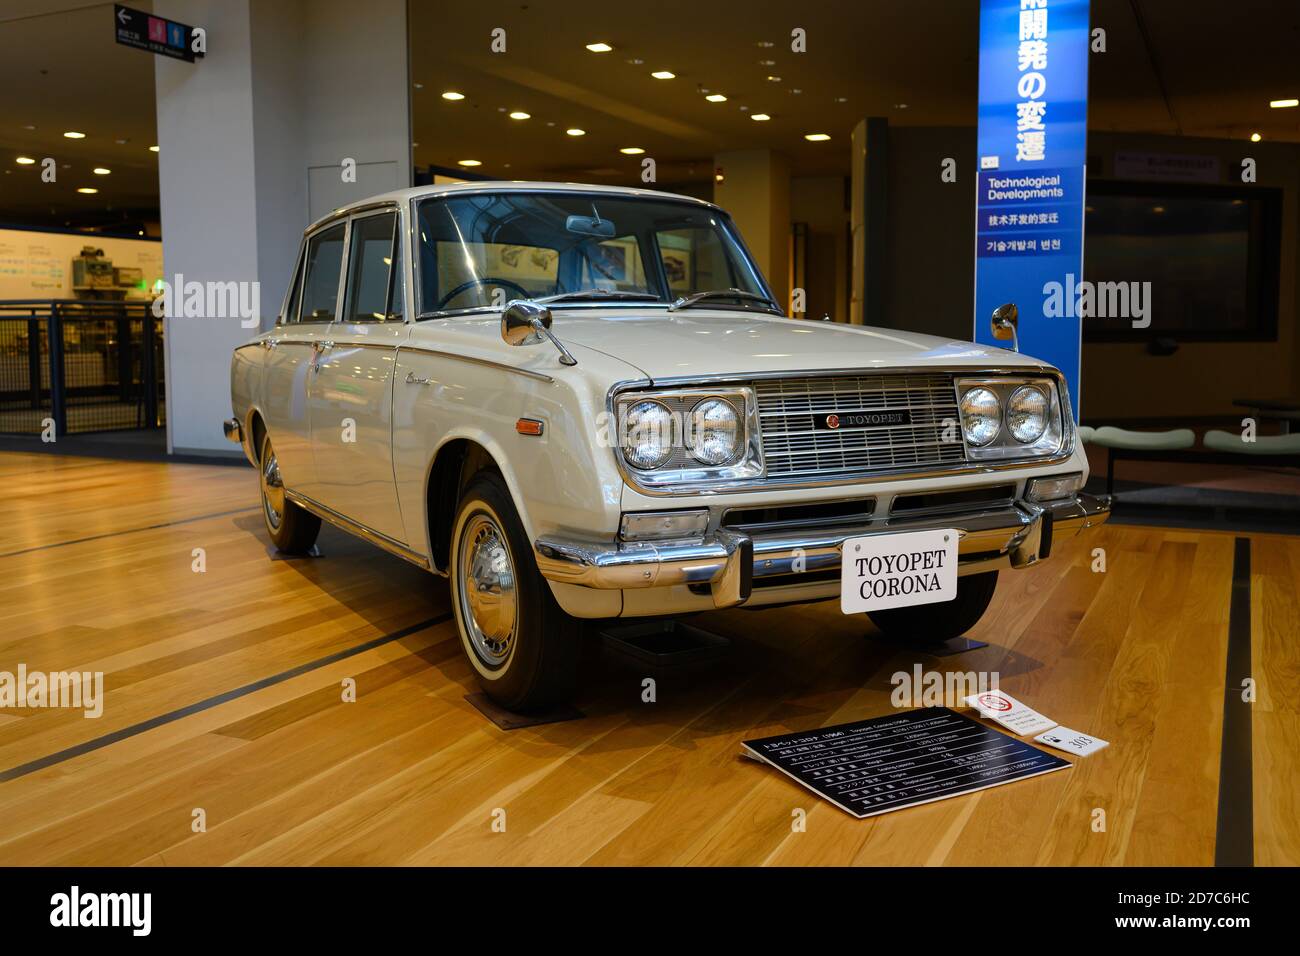 Nagoya / Japan Nov 26 2019 :  Classic car model Toyopet corona parked in the hall of the Memorial Museum of Industry and Technology. Toyota is a popul Stock Photo